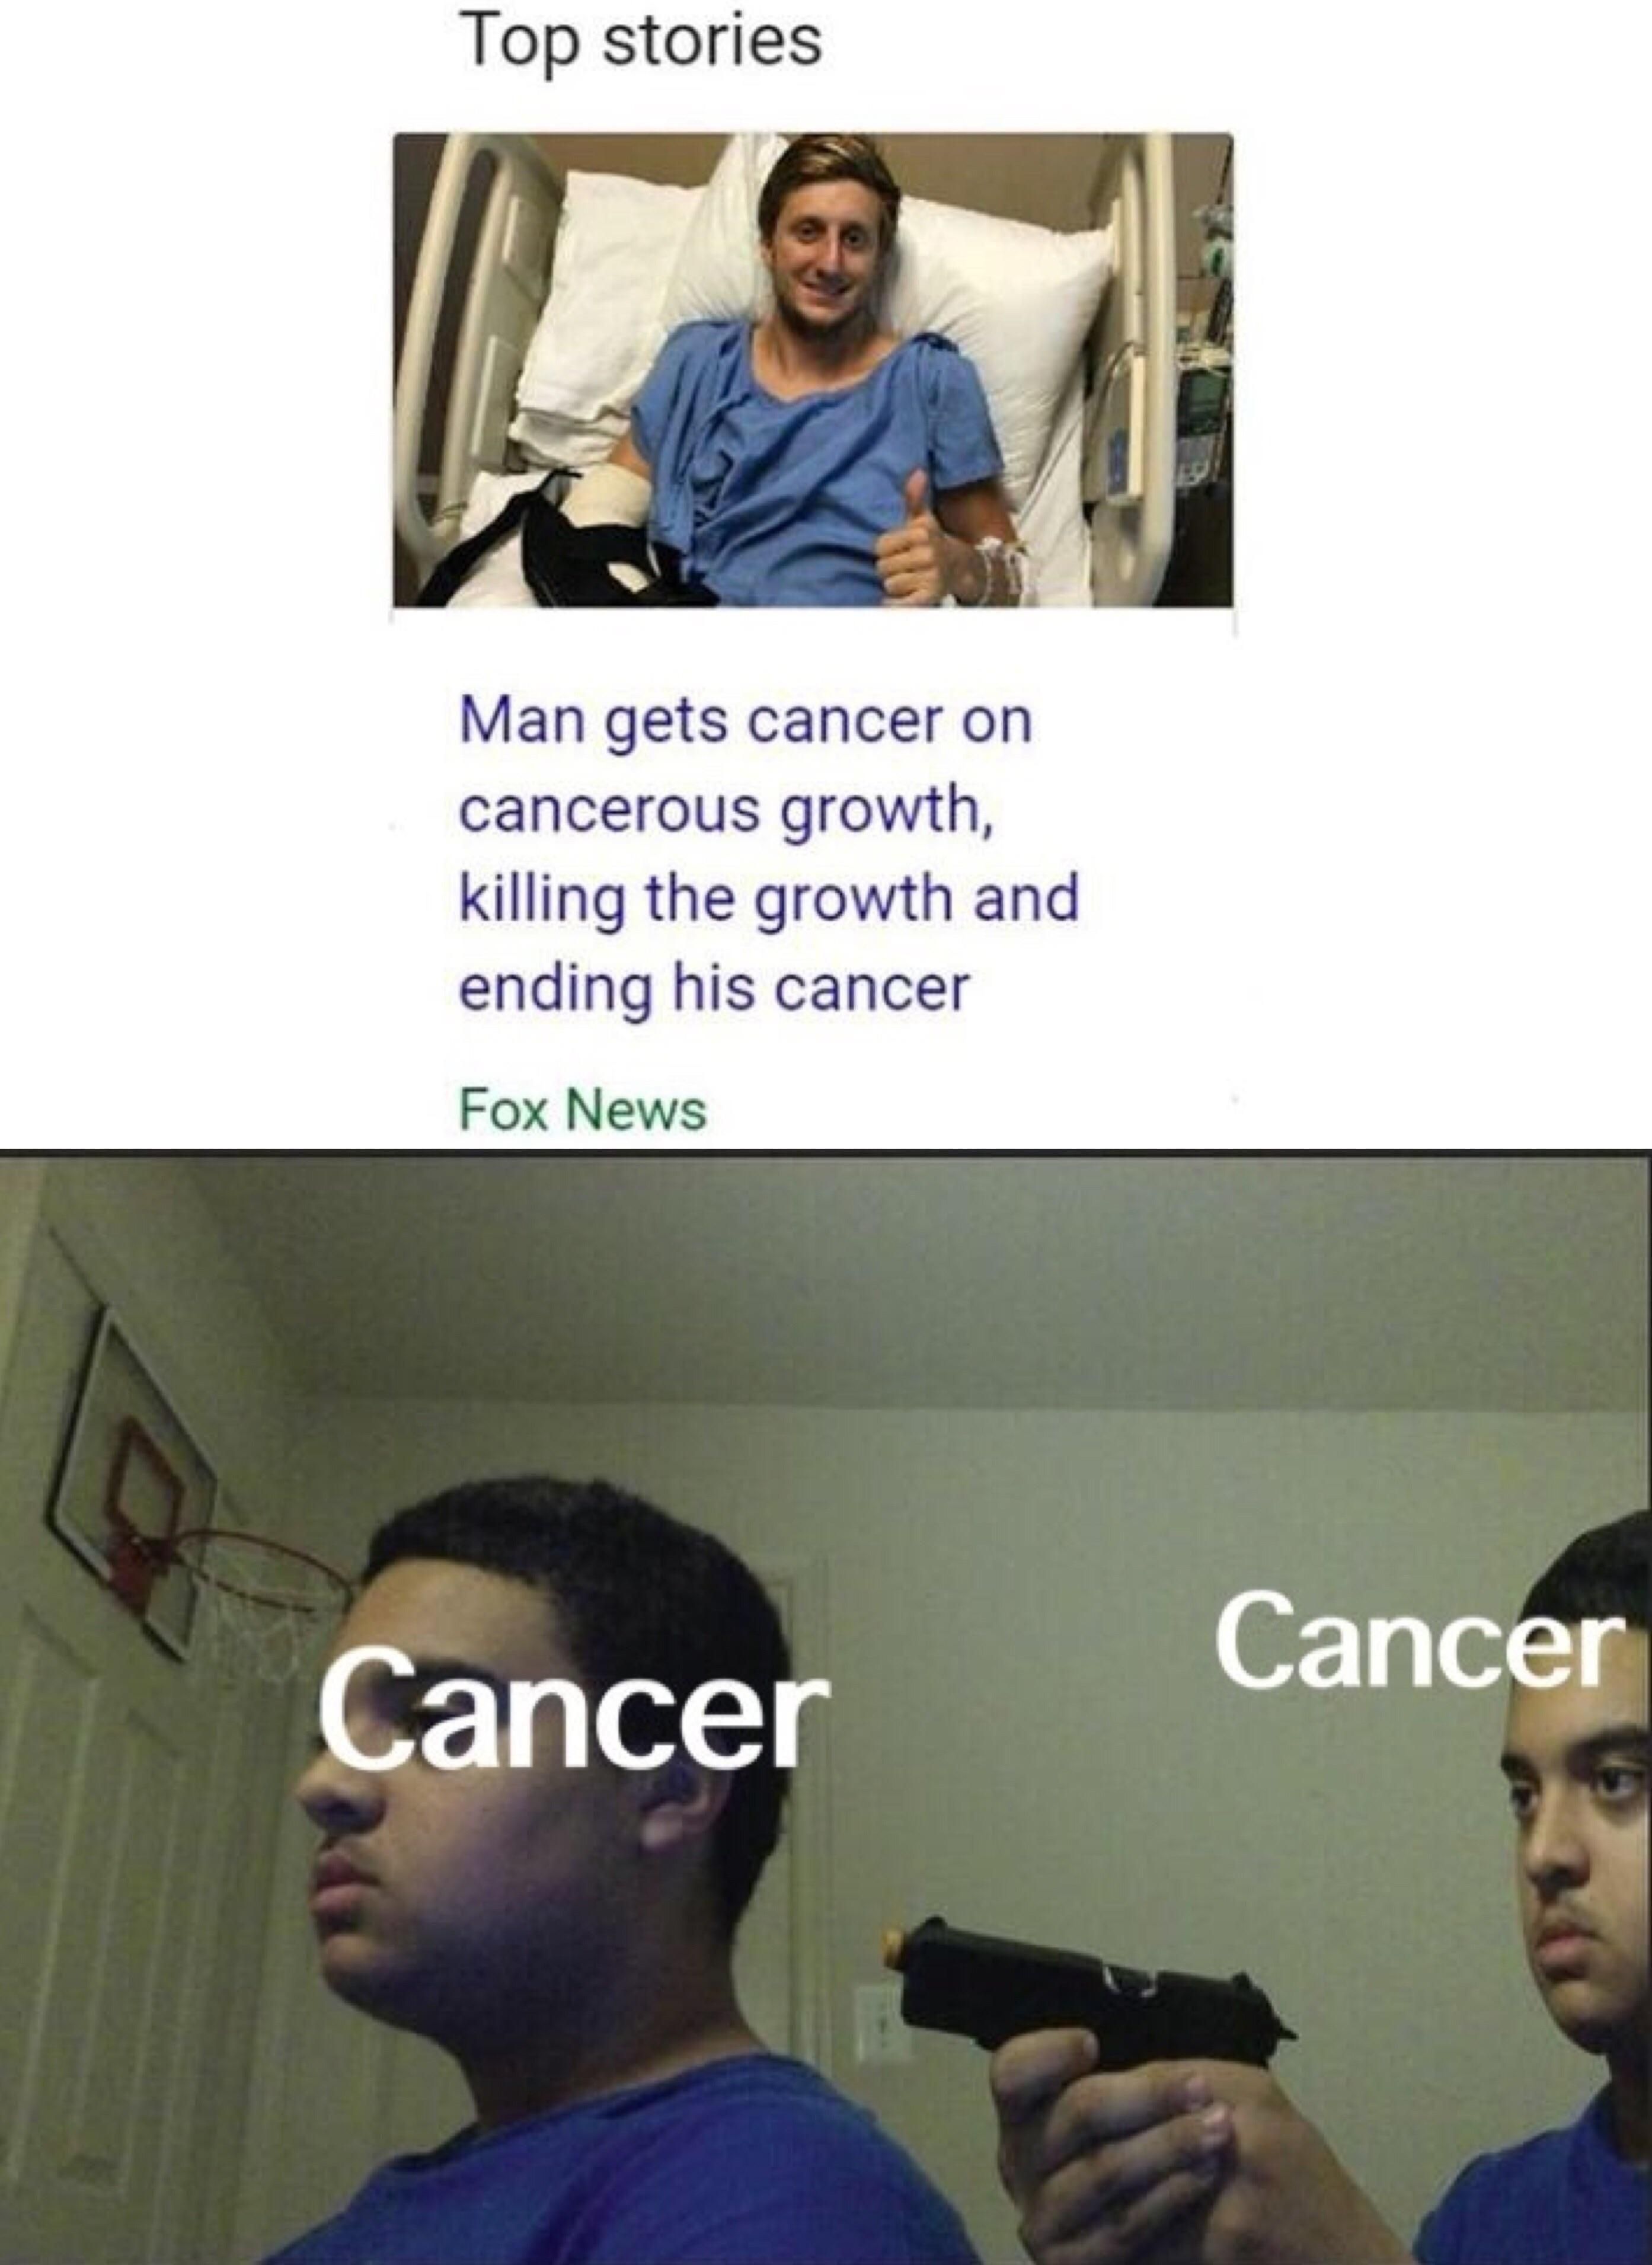 You have cancer, but this doesn’t mean you have cancer